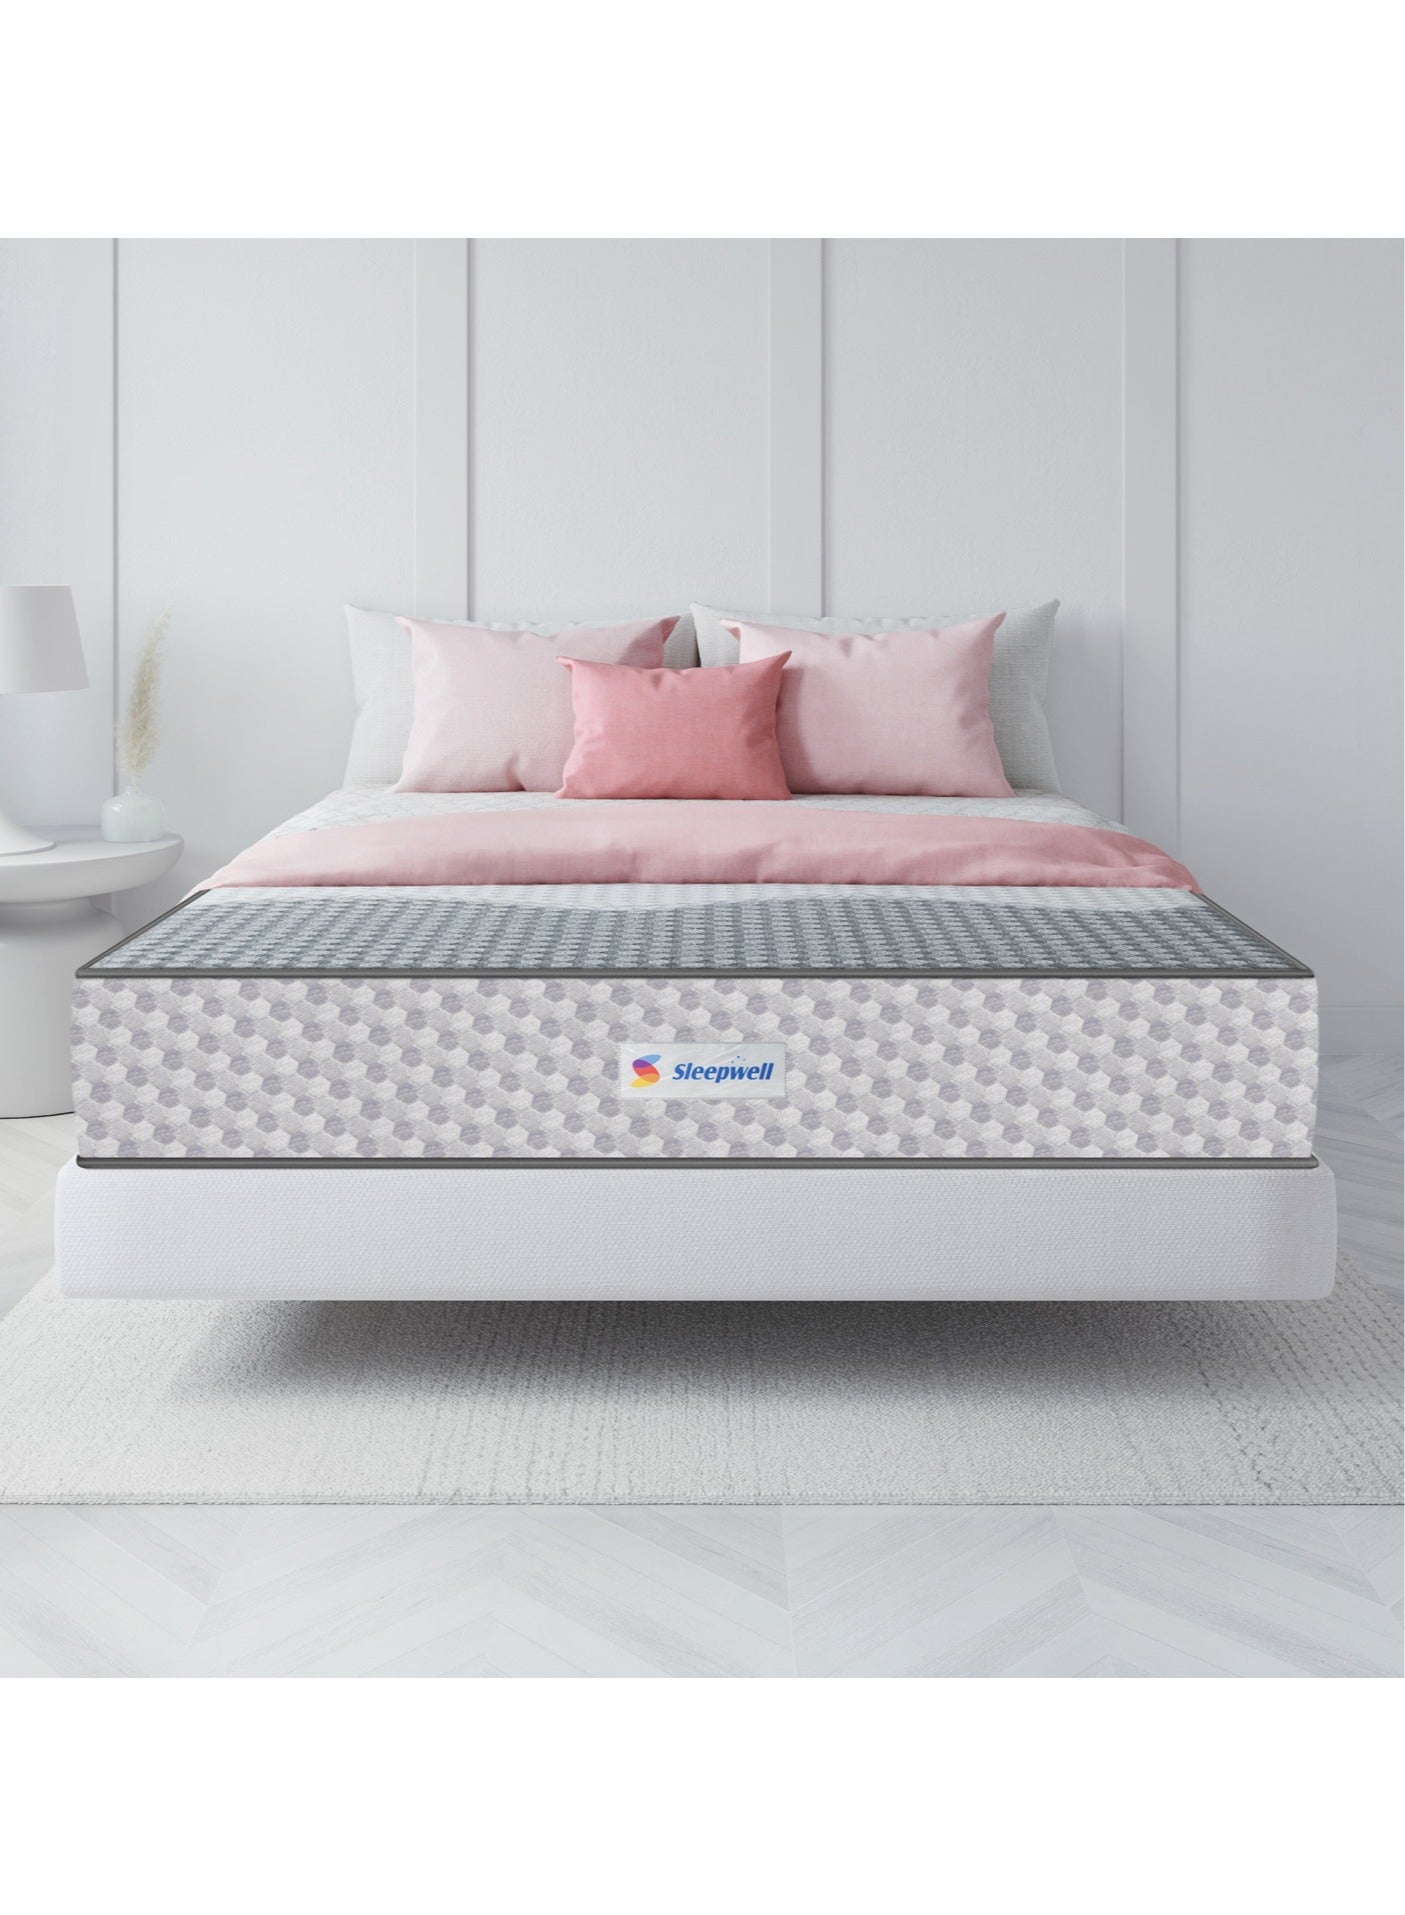 Sleepwell Ortho Pro Profiled Foam, 100 Night Trial, Impressions Memory Foam Mattress With Airvent Cool Gel Technology, Queen Bed Size (200L x 160W x 20H cm)